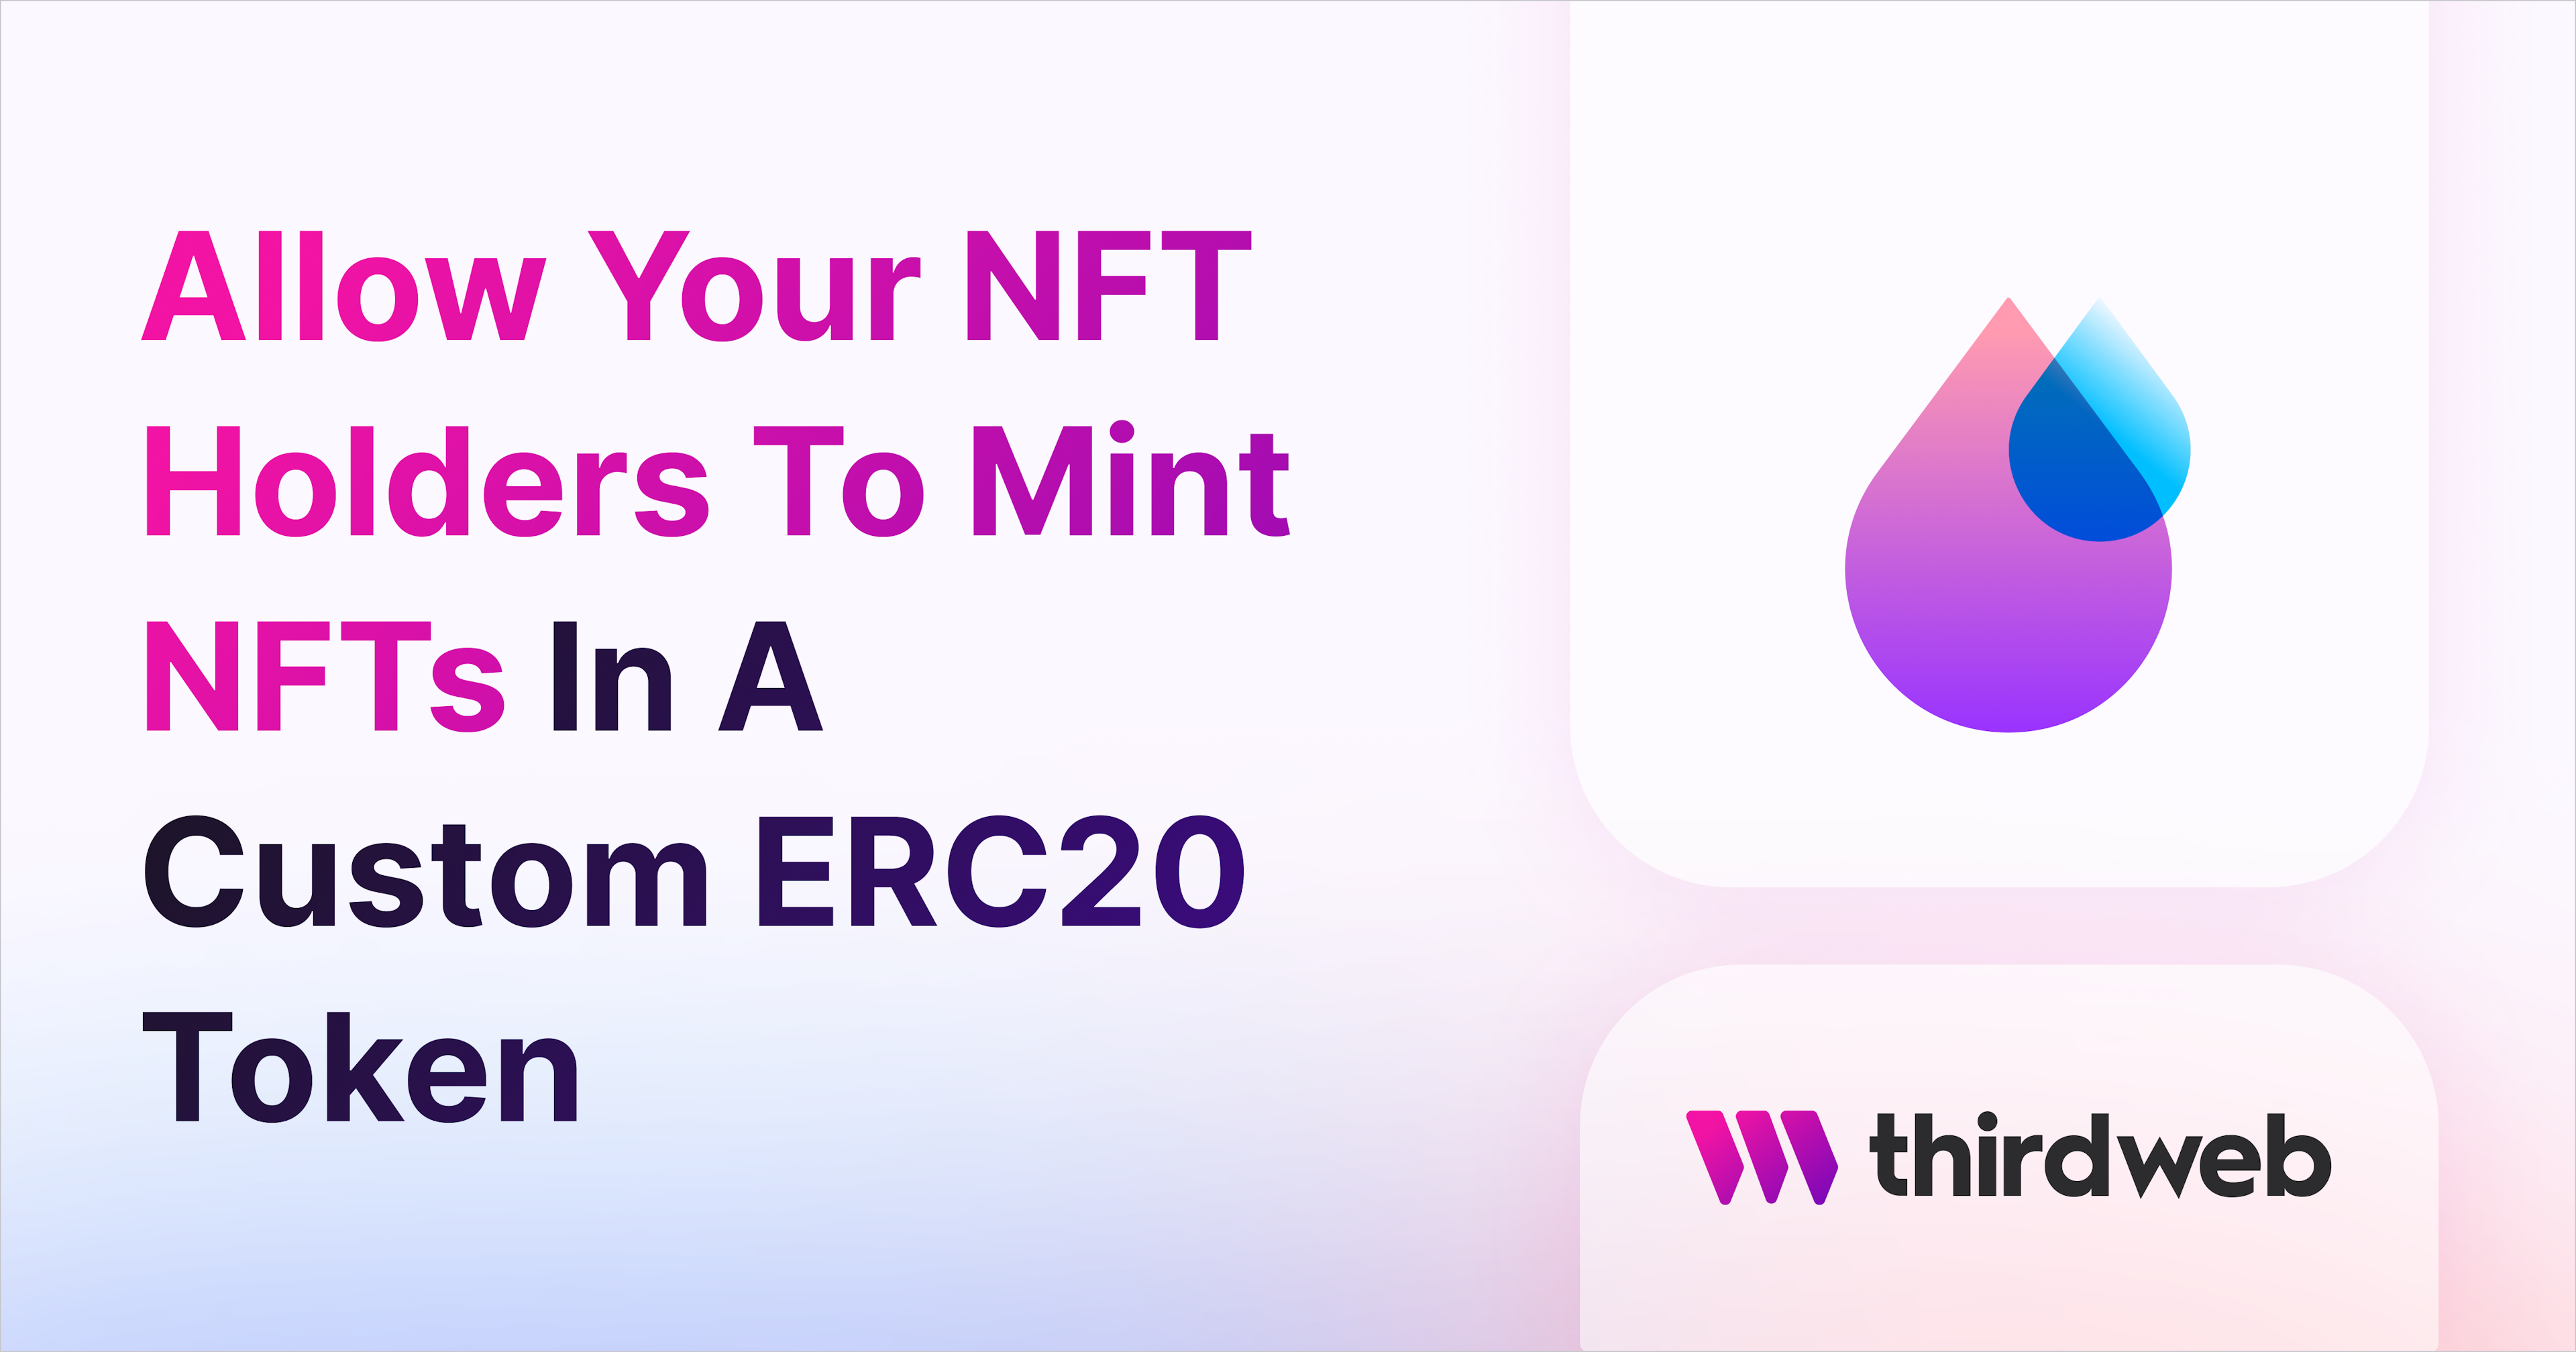 Allow Your NFT Holders To Mint NFTs In A Custom ERC20 Token